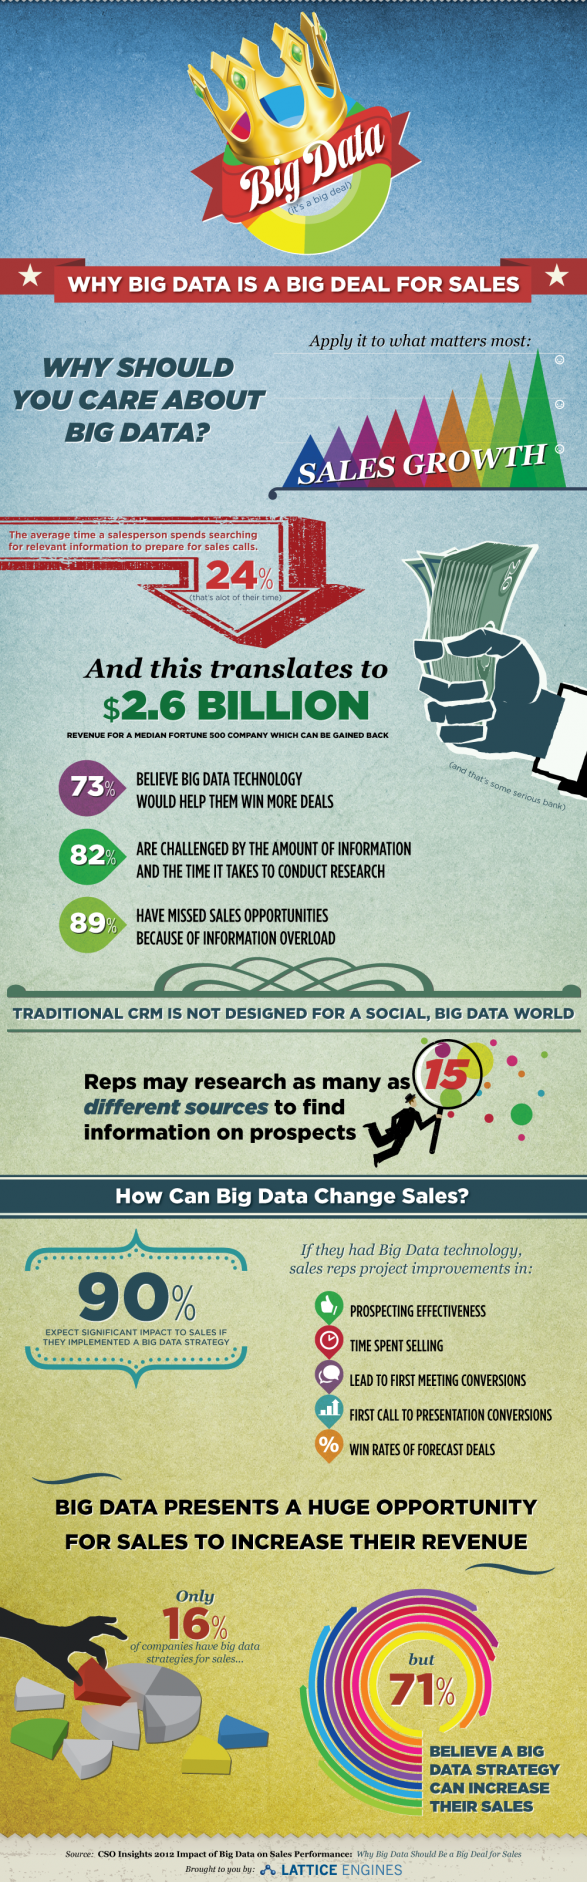 Why Big Data is a Big Deal for Sales